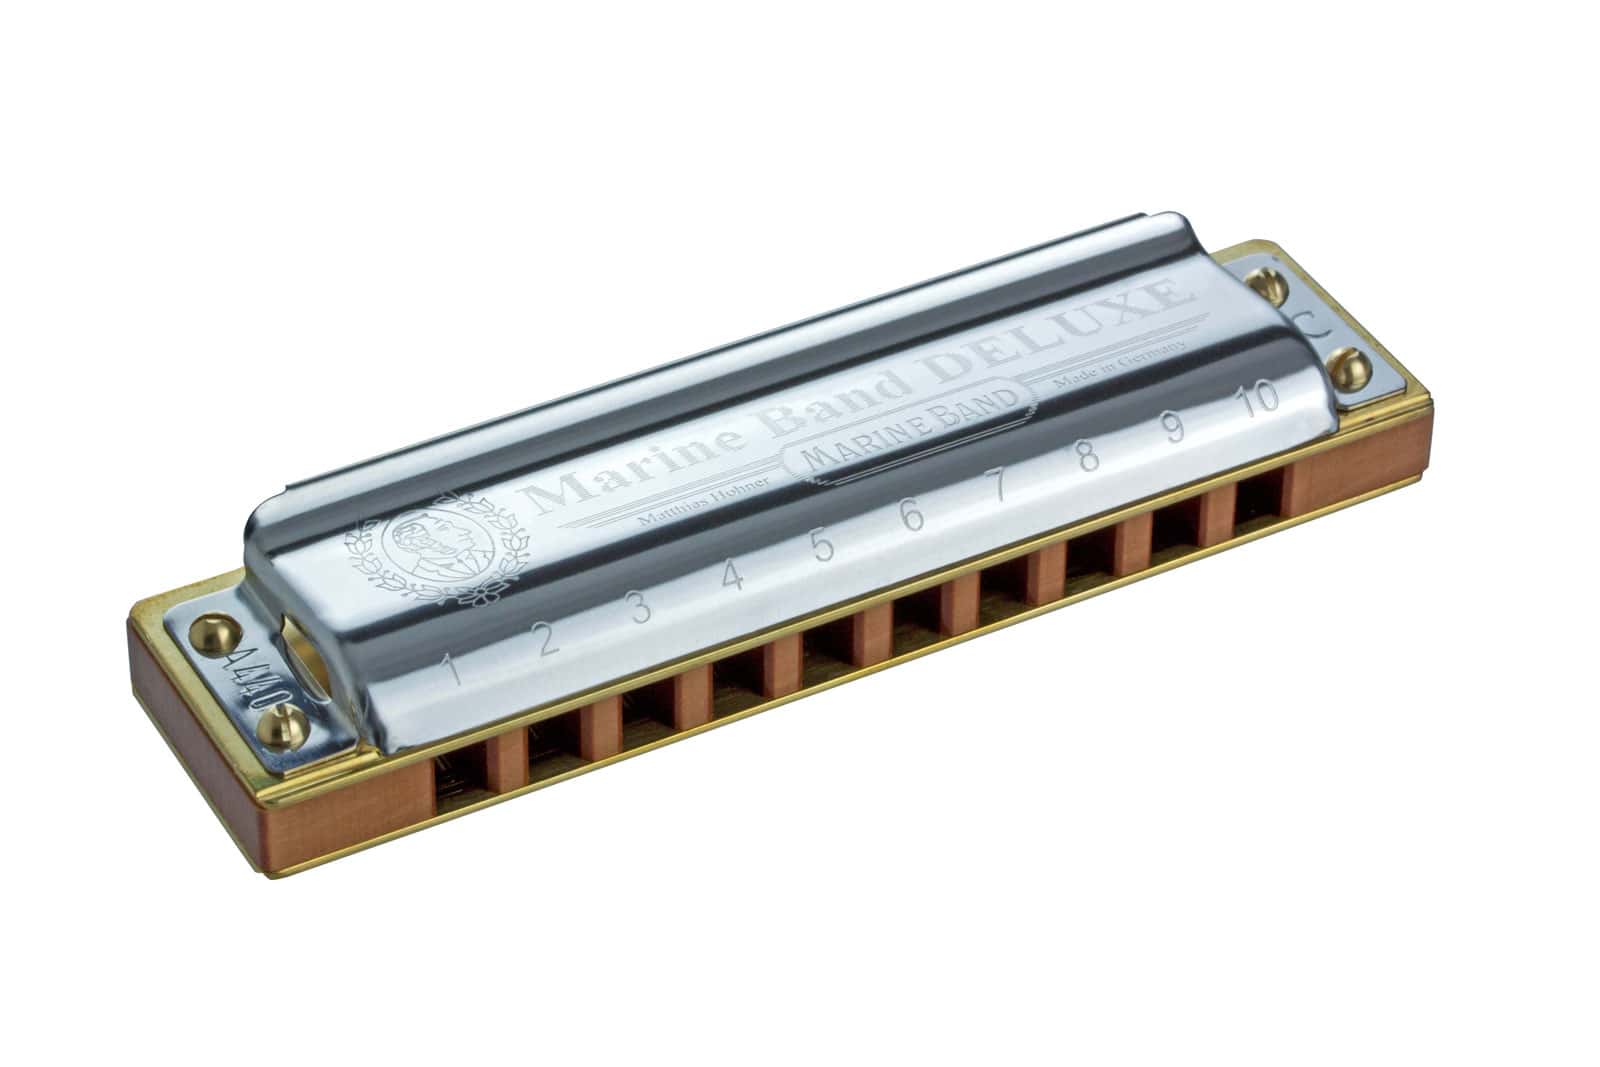 HOHNER DIATONICO 2005/20 MARINE BAND DELUXE 10 AGUJEROS D RE